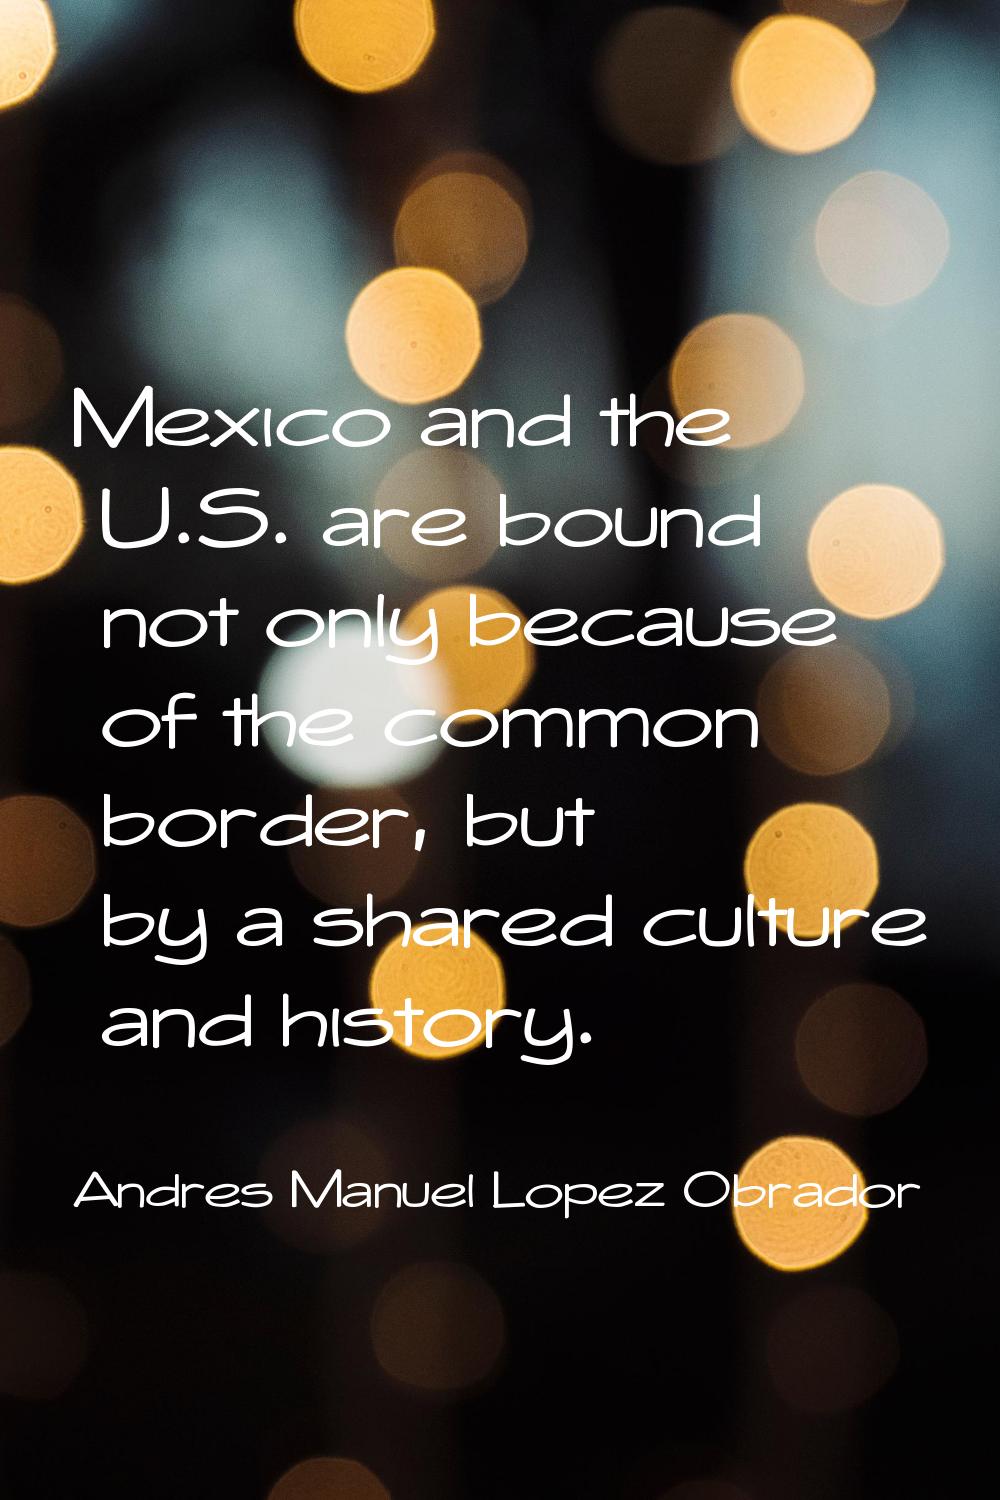 Mexico and the U.S. are bound not only because of the common border, but by a shared culture and hi